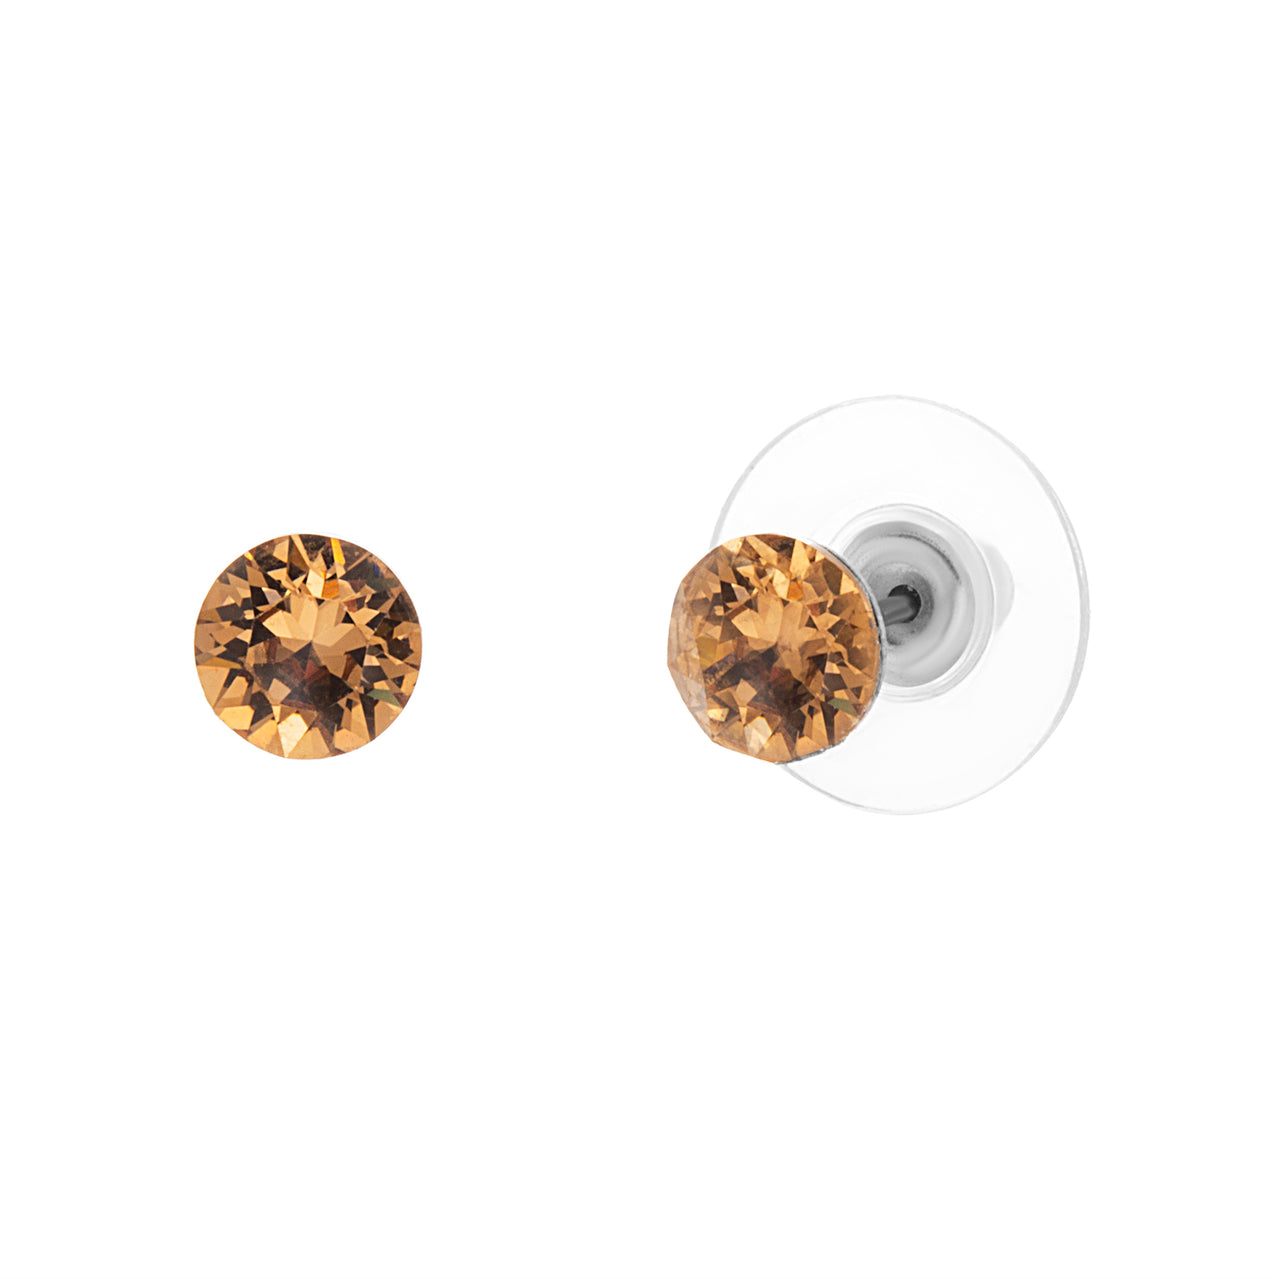 Lesa Michele Stud Earrings Made with Light Smoked Topaz Crystals in Stainless Steel